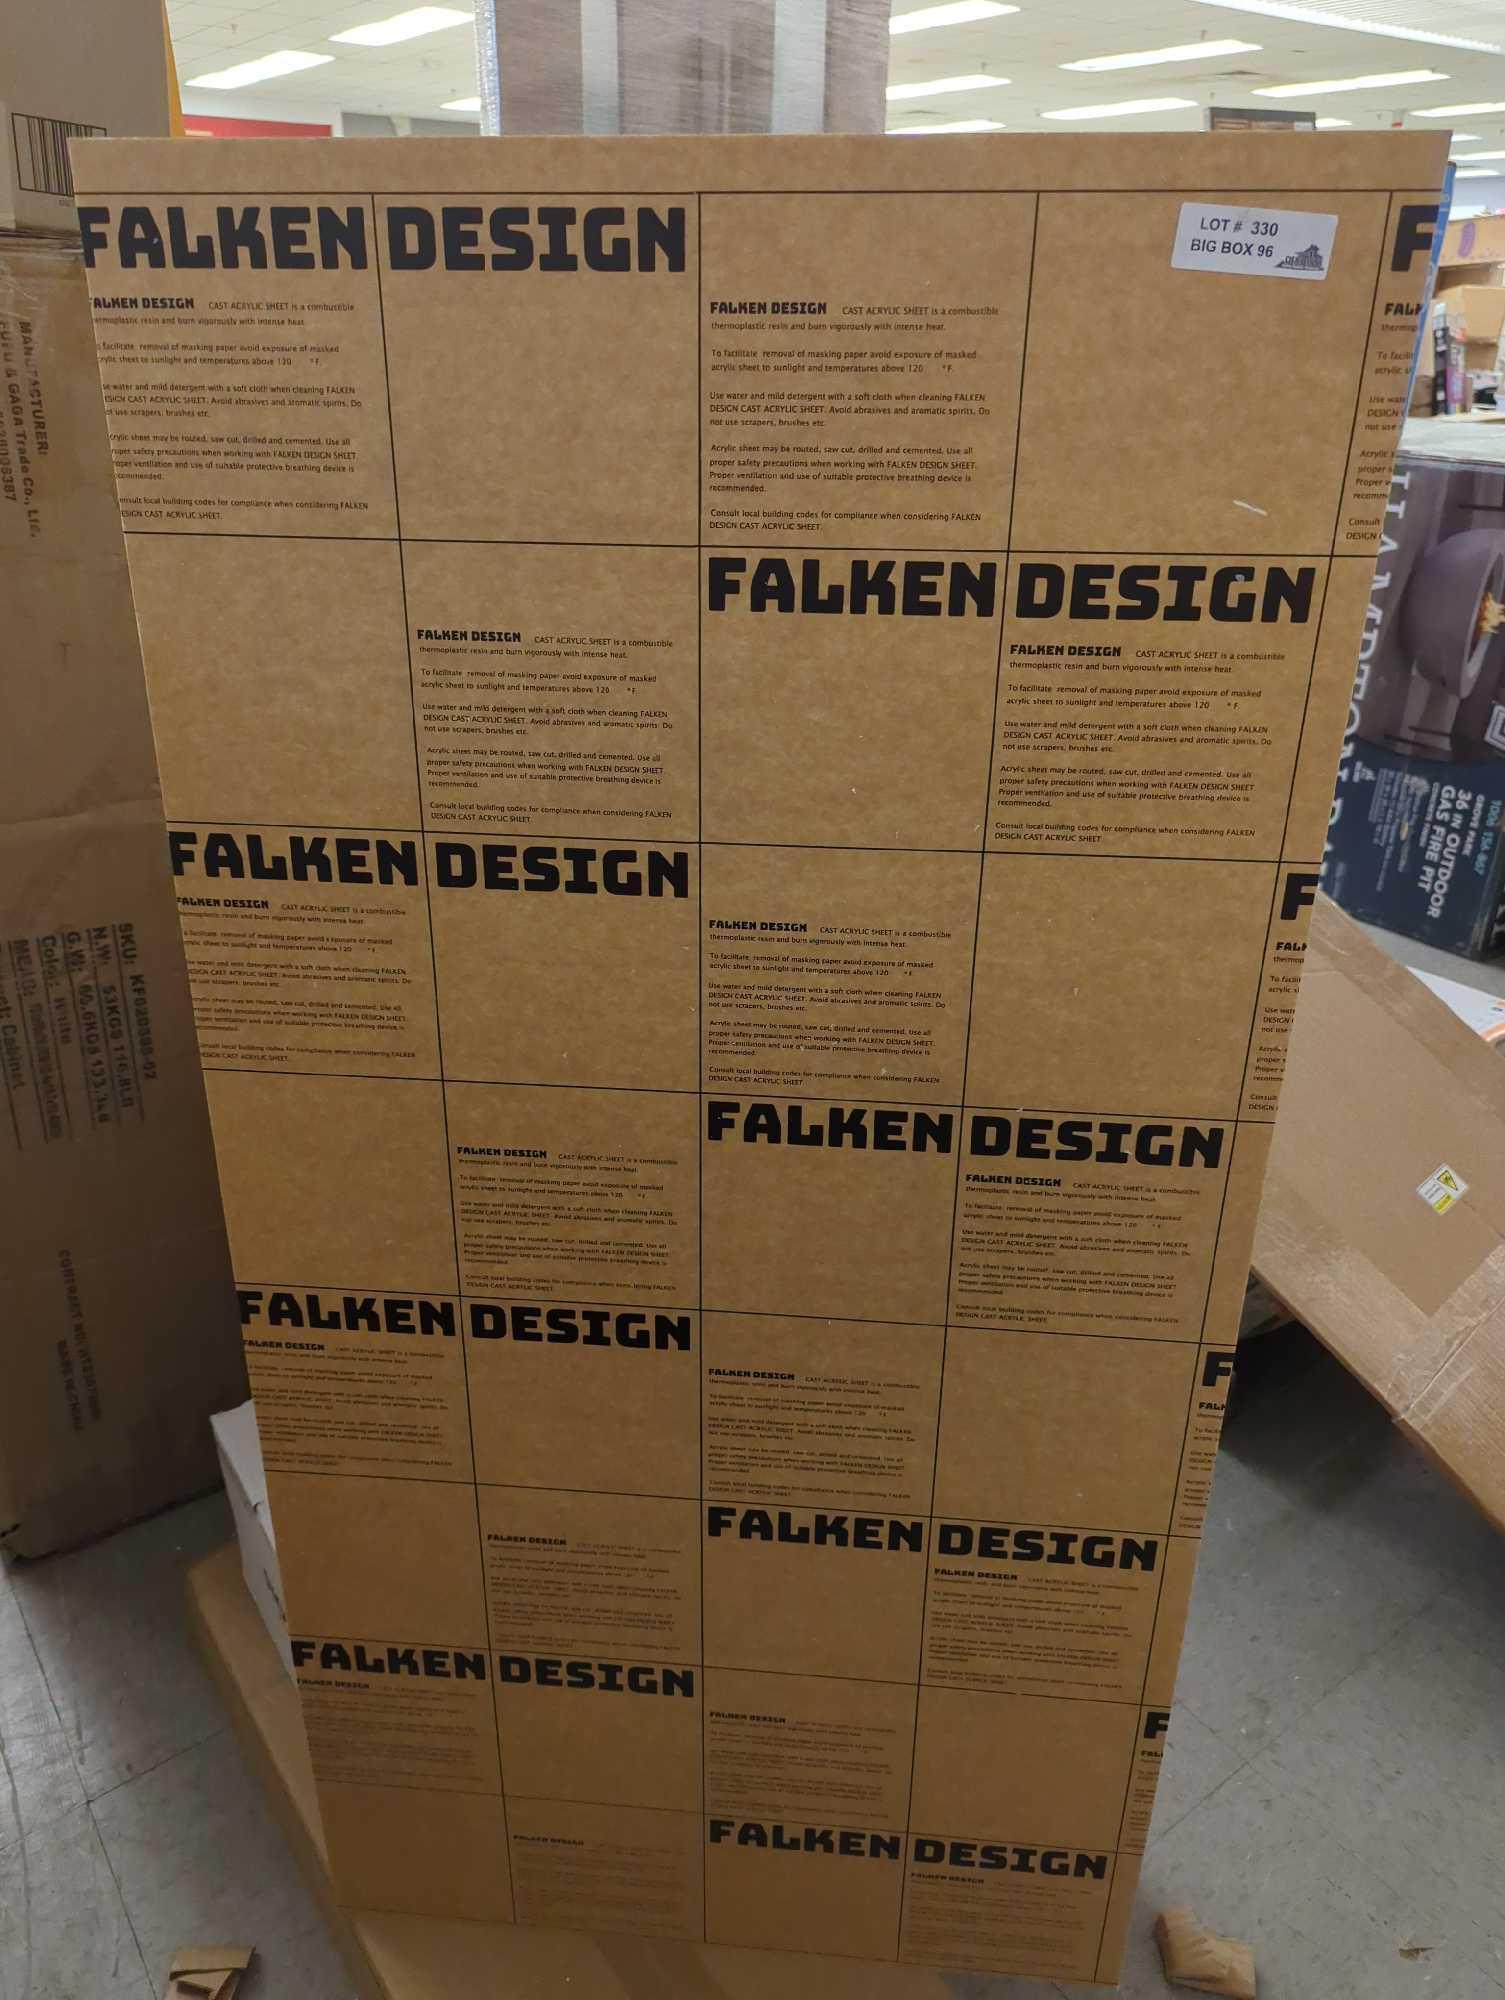 Falken Design 24 in. x 48 in. x 1/8 in. Thick Acrylic White Opaque 7508 Sheet, Appears to be New Out